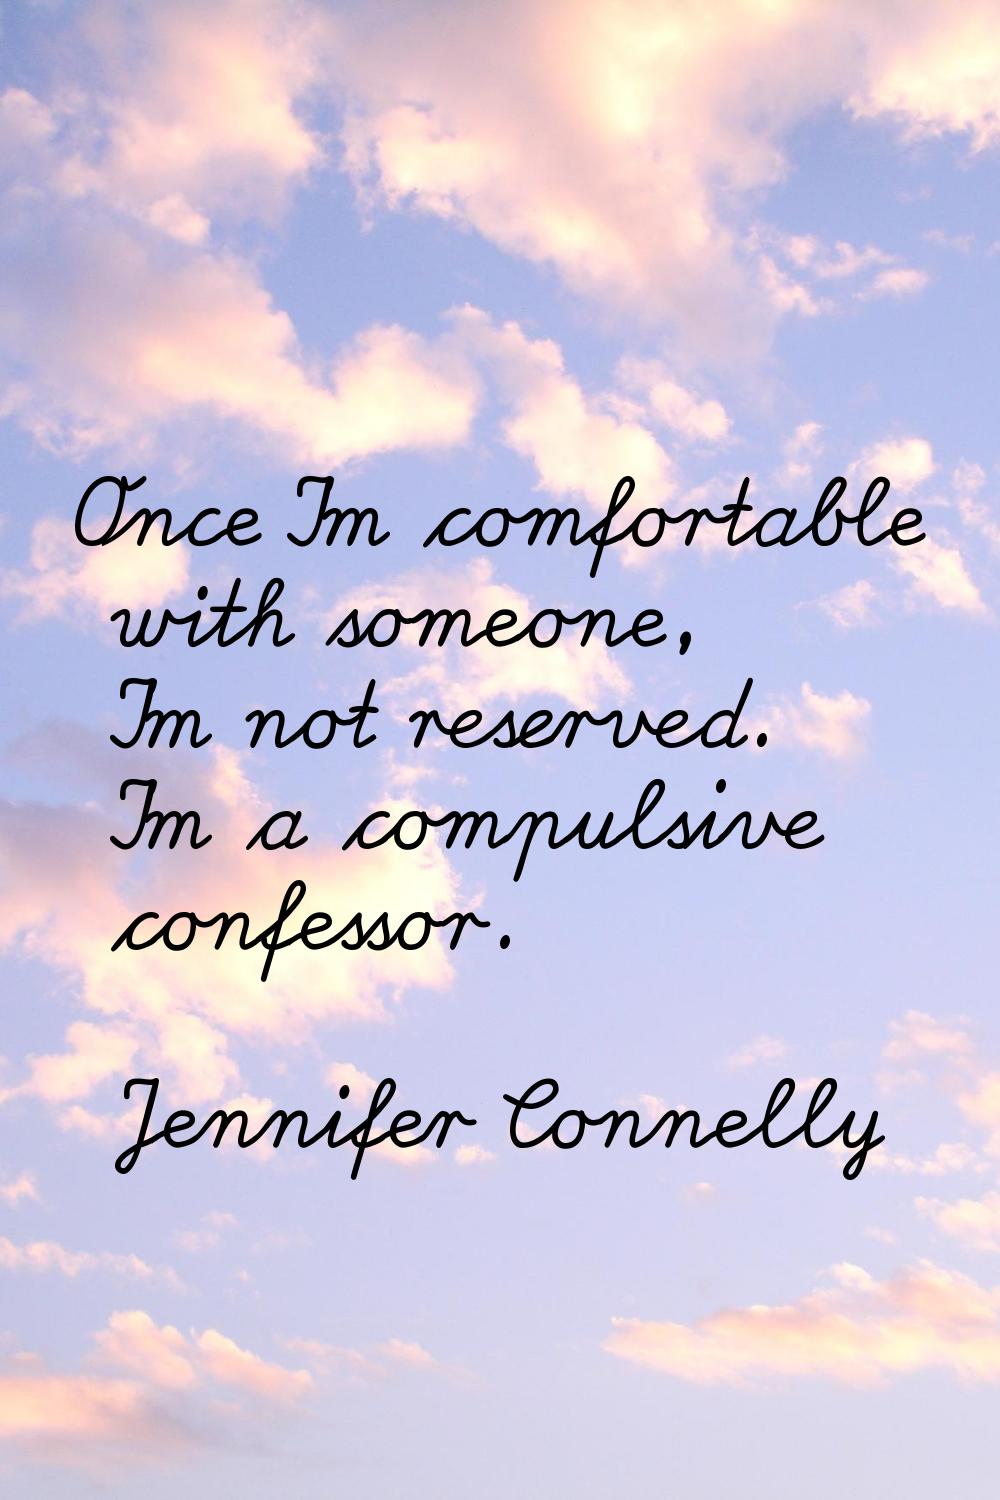 Once I'm comfortable with someone, I'm not reserved. I'm a compulsive confessor.